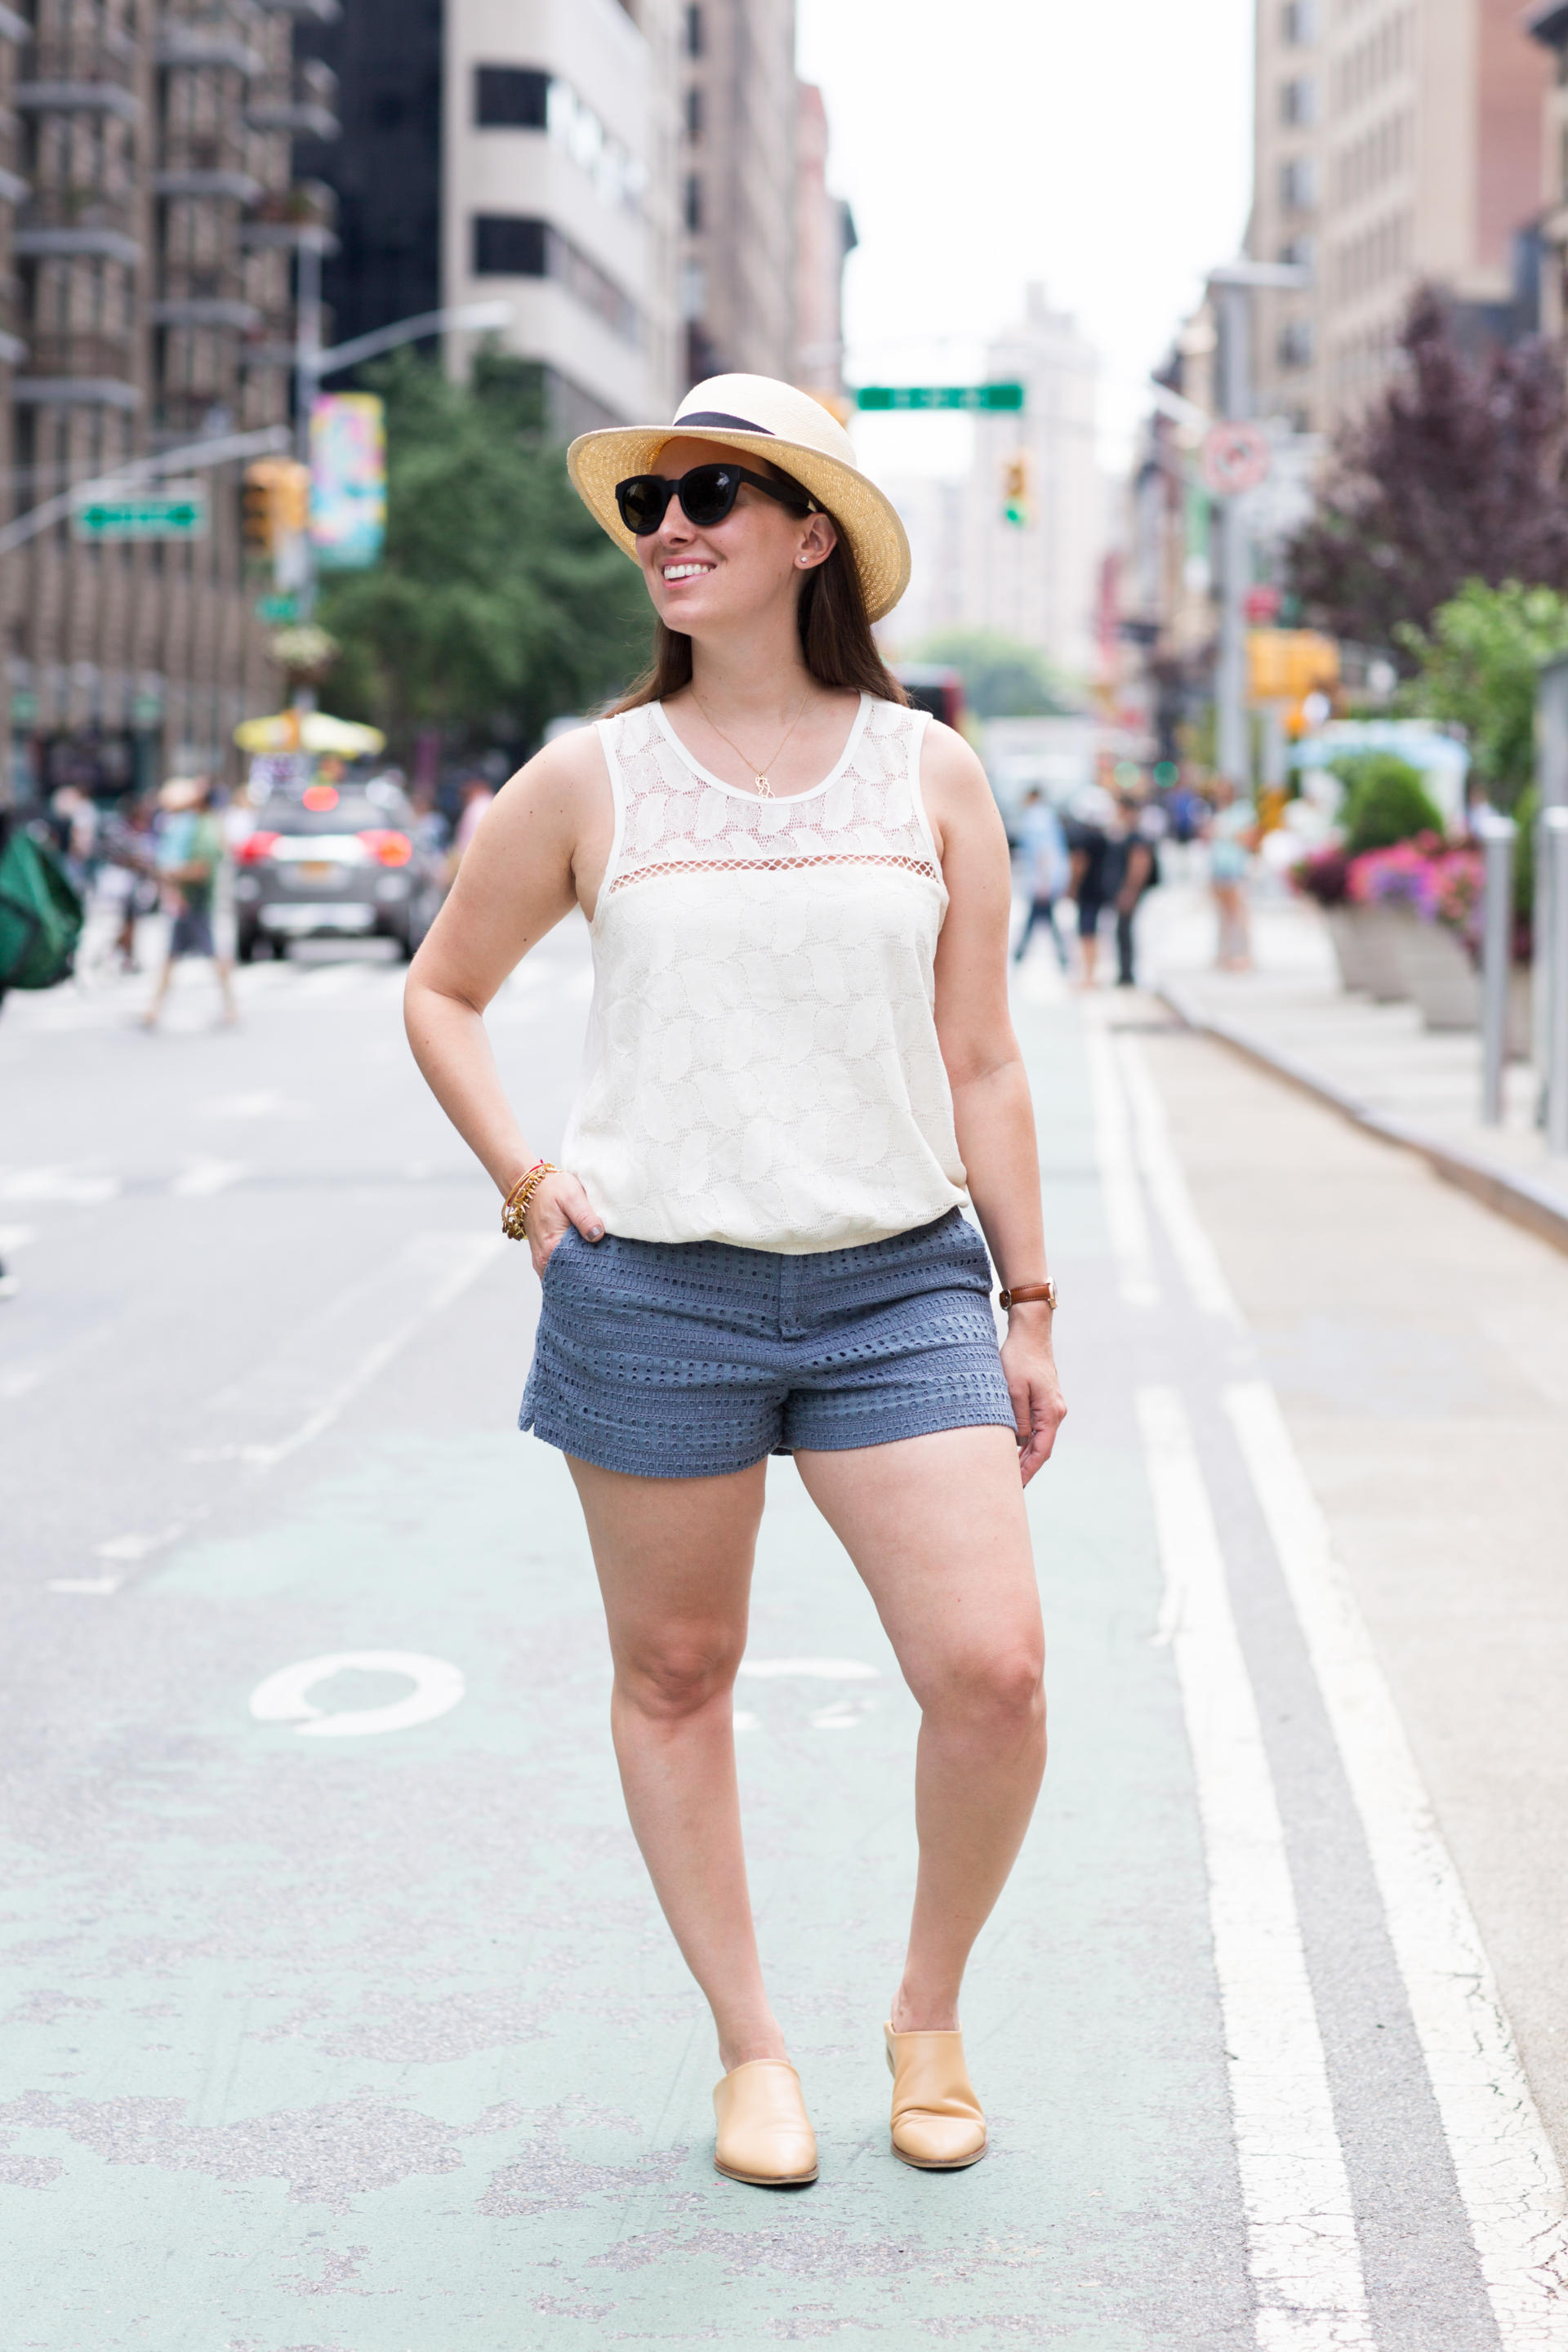 STYLE: A New York City Staycation with Vacay Style